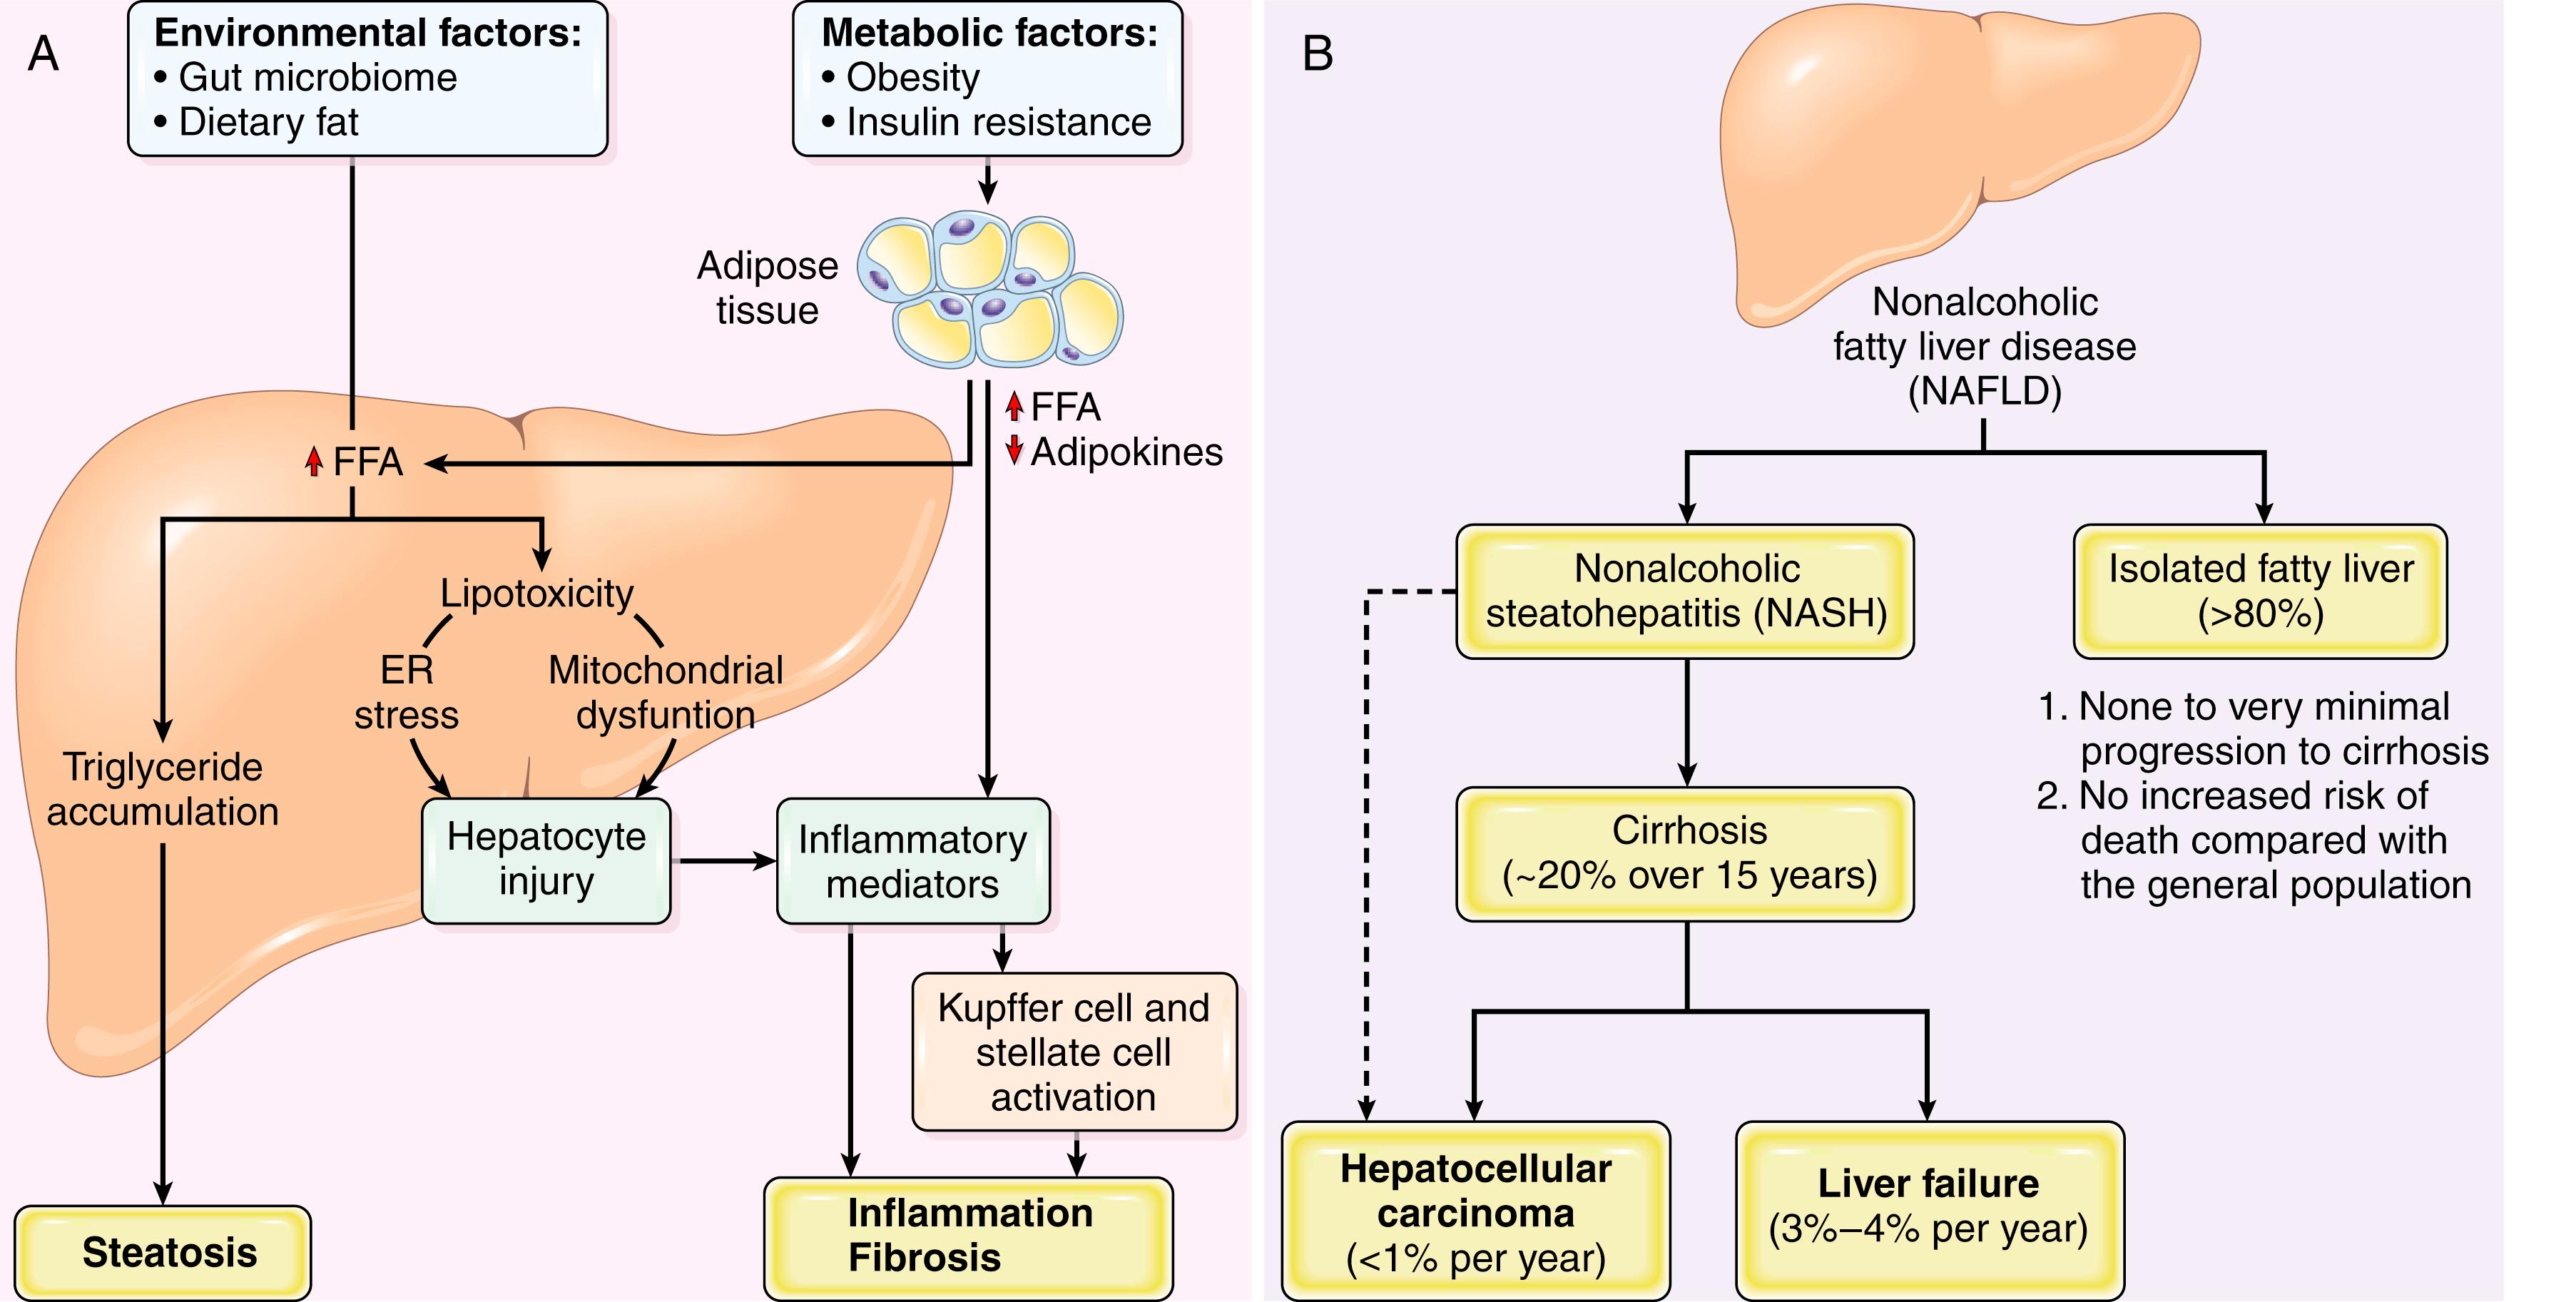 FIG. 14.19, (A) Pathogenesis of nonalcoholic fatty liver disease (NAFLD). (B) Natural history of NAFLD. Isolated fatty liver disease shows minimal risk for progression to cirrhosis or increased mortality, while nonalcoholic steatohepatitis shows increased overall mortality as well as increased risk for cirrhosis and hepatocellular carcinoma. ER , Endoplasmic reticulum; FFA , free fatty acid.